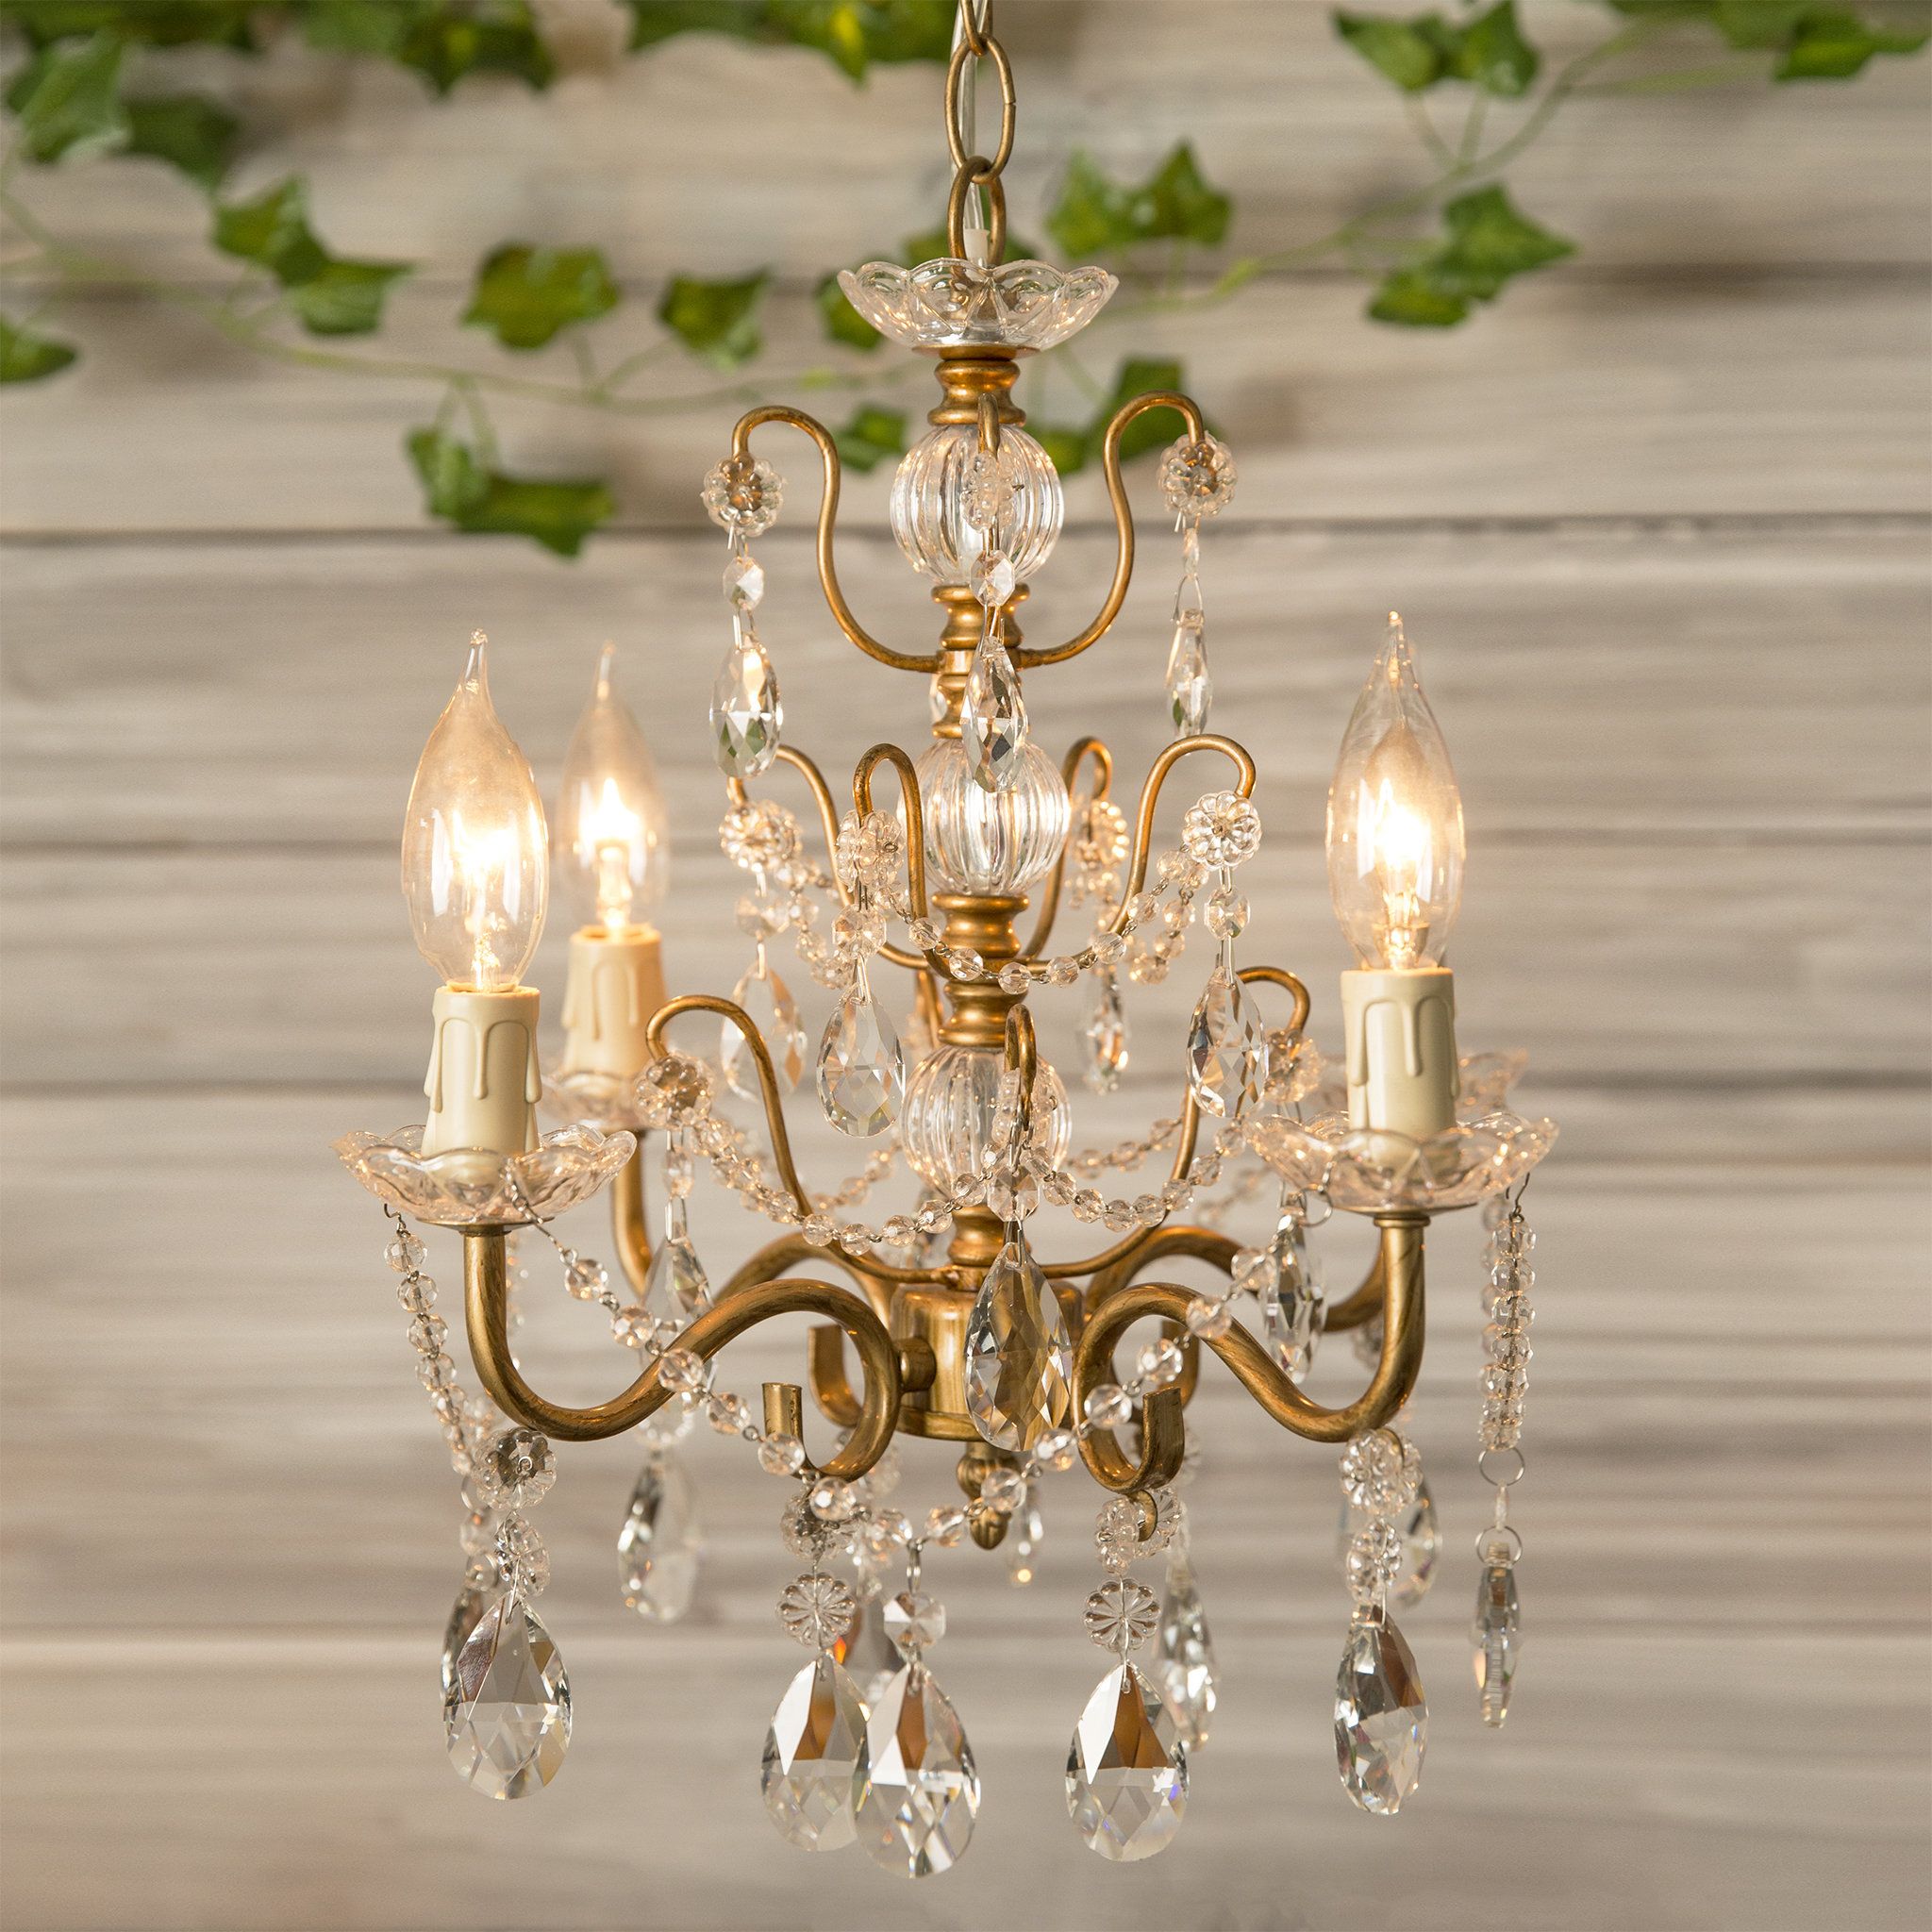 Blanchette 4 Light Candle Style Chandelier With Regard To Blanchette 5 Light Candle Style Chandeliers (Photo 3 of 30)